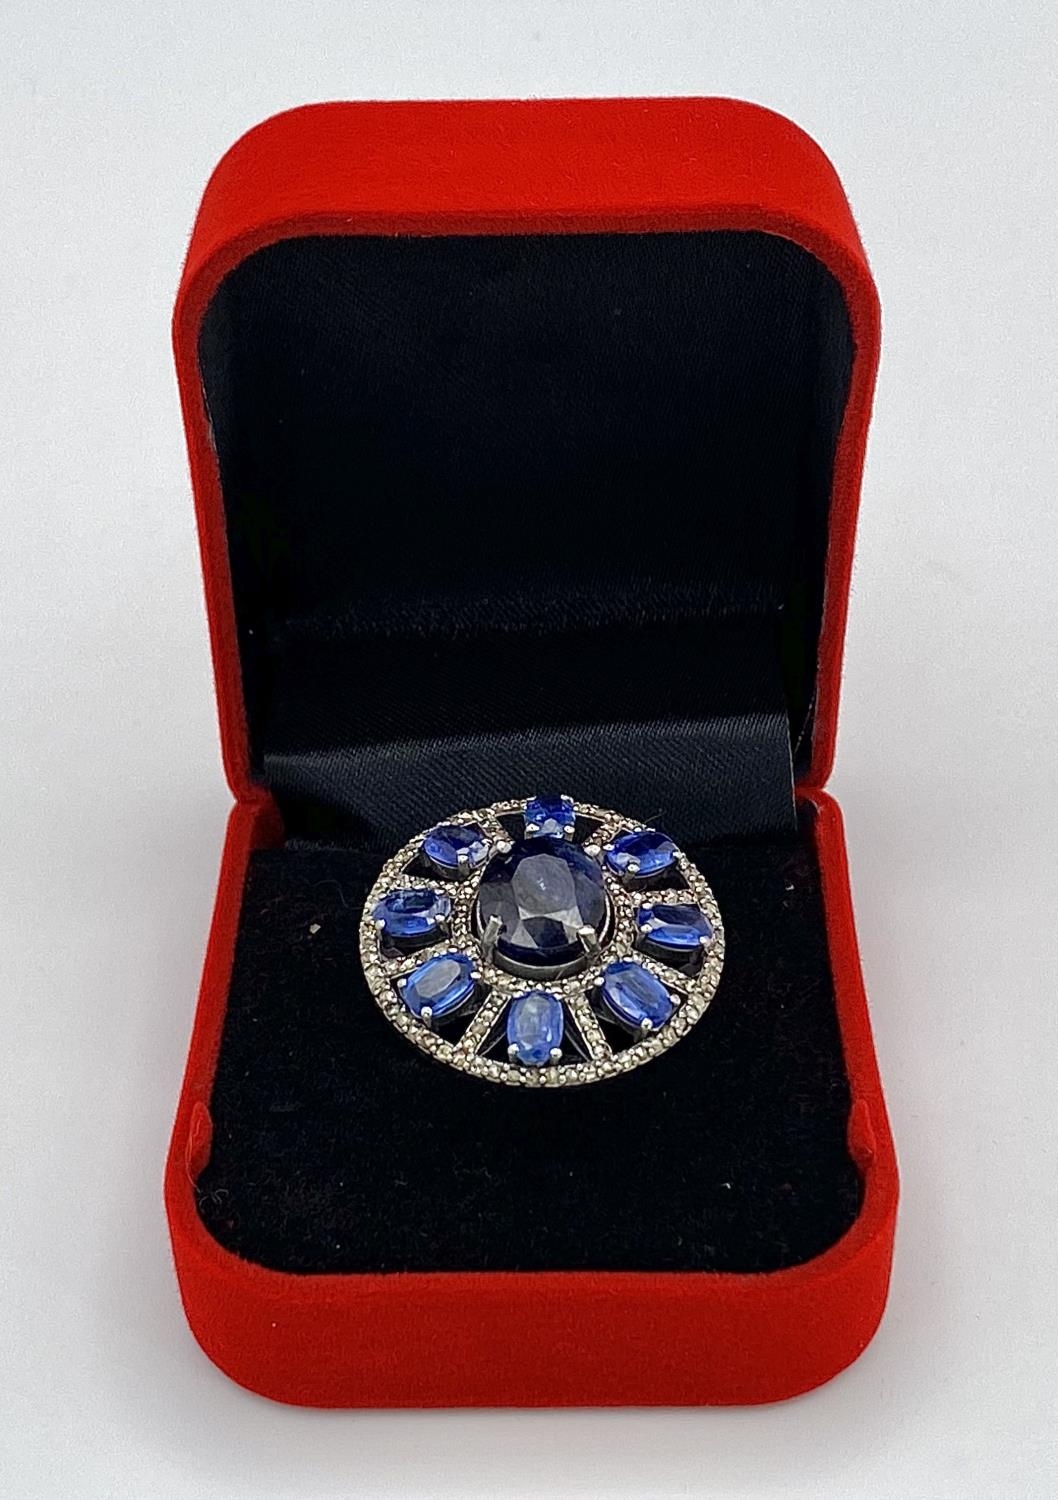 A 10ct Topaz Ring with 6.15ctw of Kyanite surround and 0.50ctw of Diamond Accents. Set in 925 - Image 6 of 6